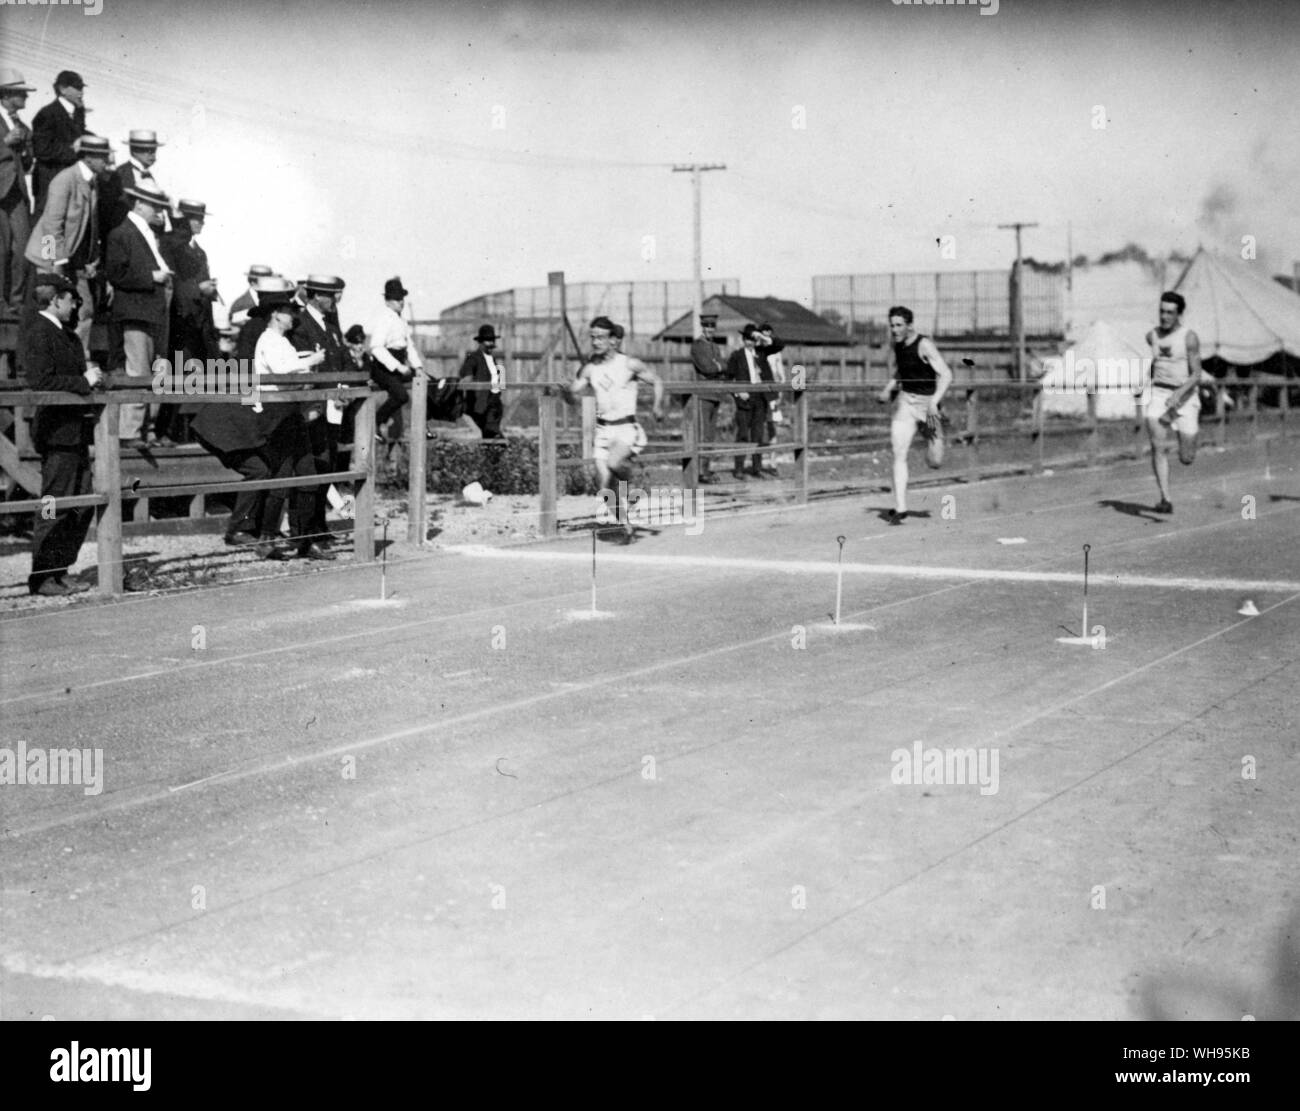 St Louis/1904 Olympic Games: Archie Hahn wins the gold medal.. Stock Photo